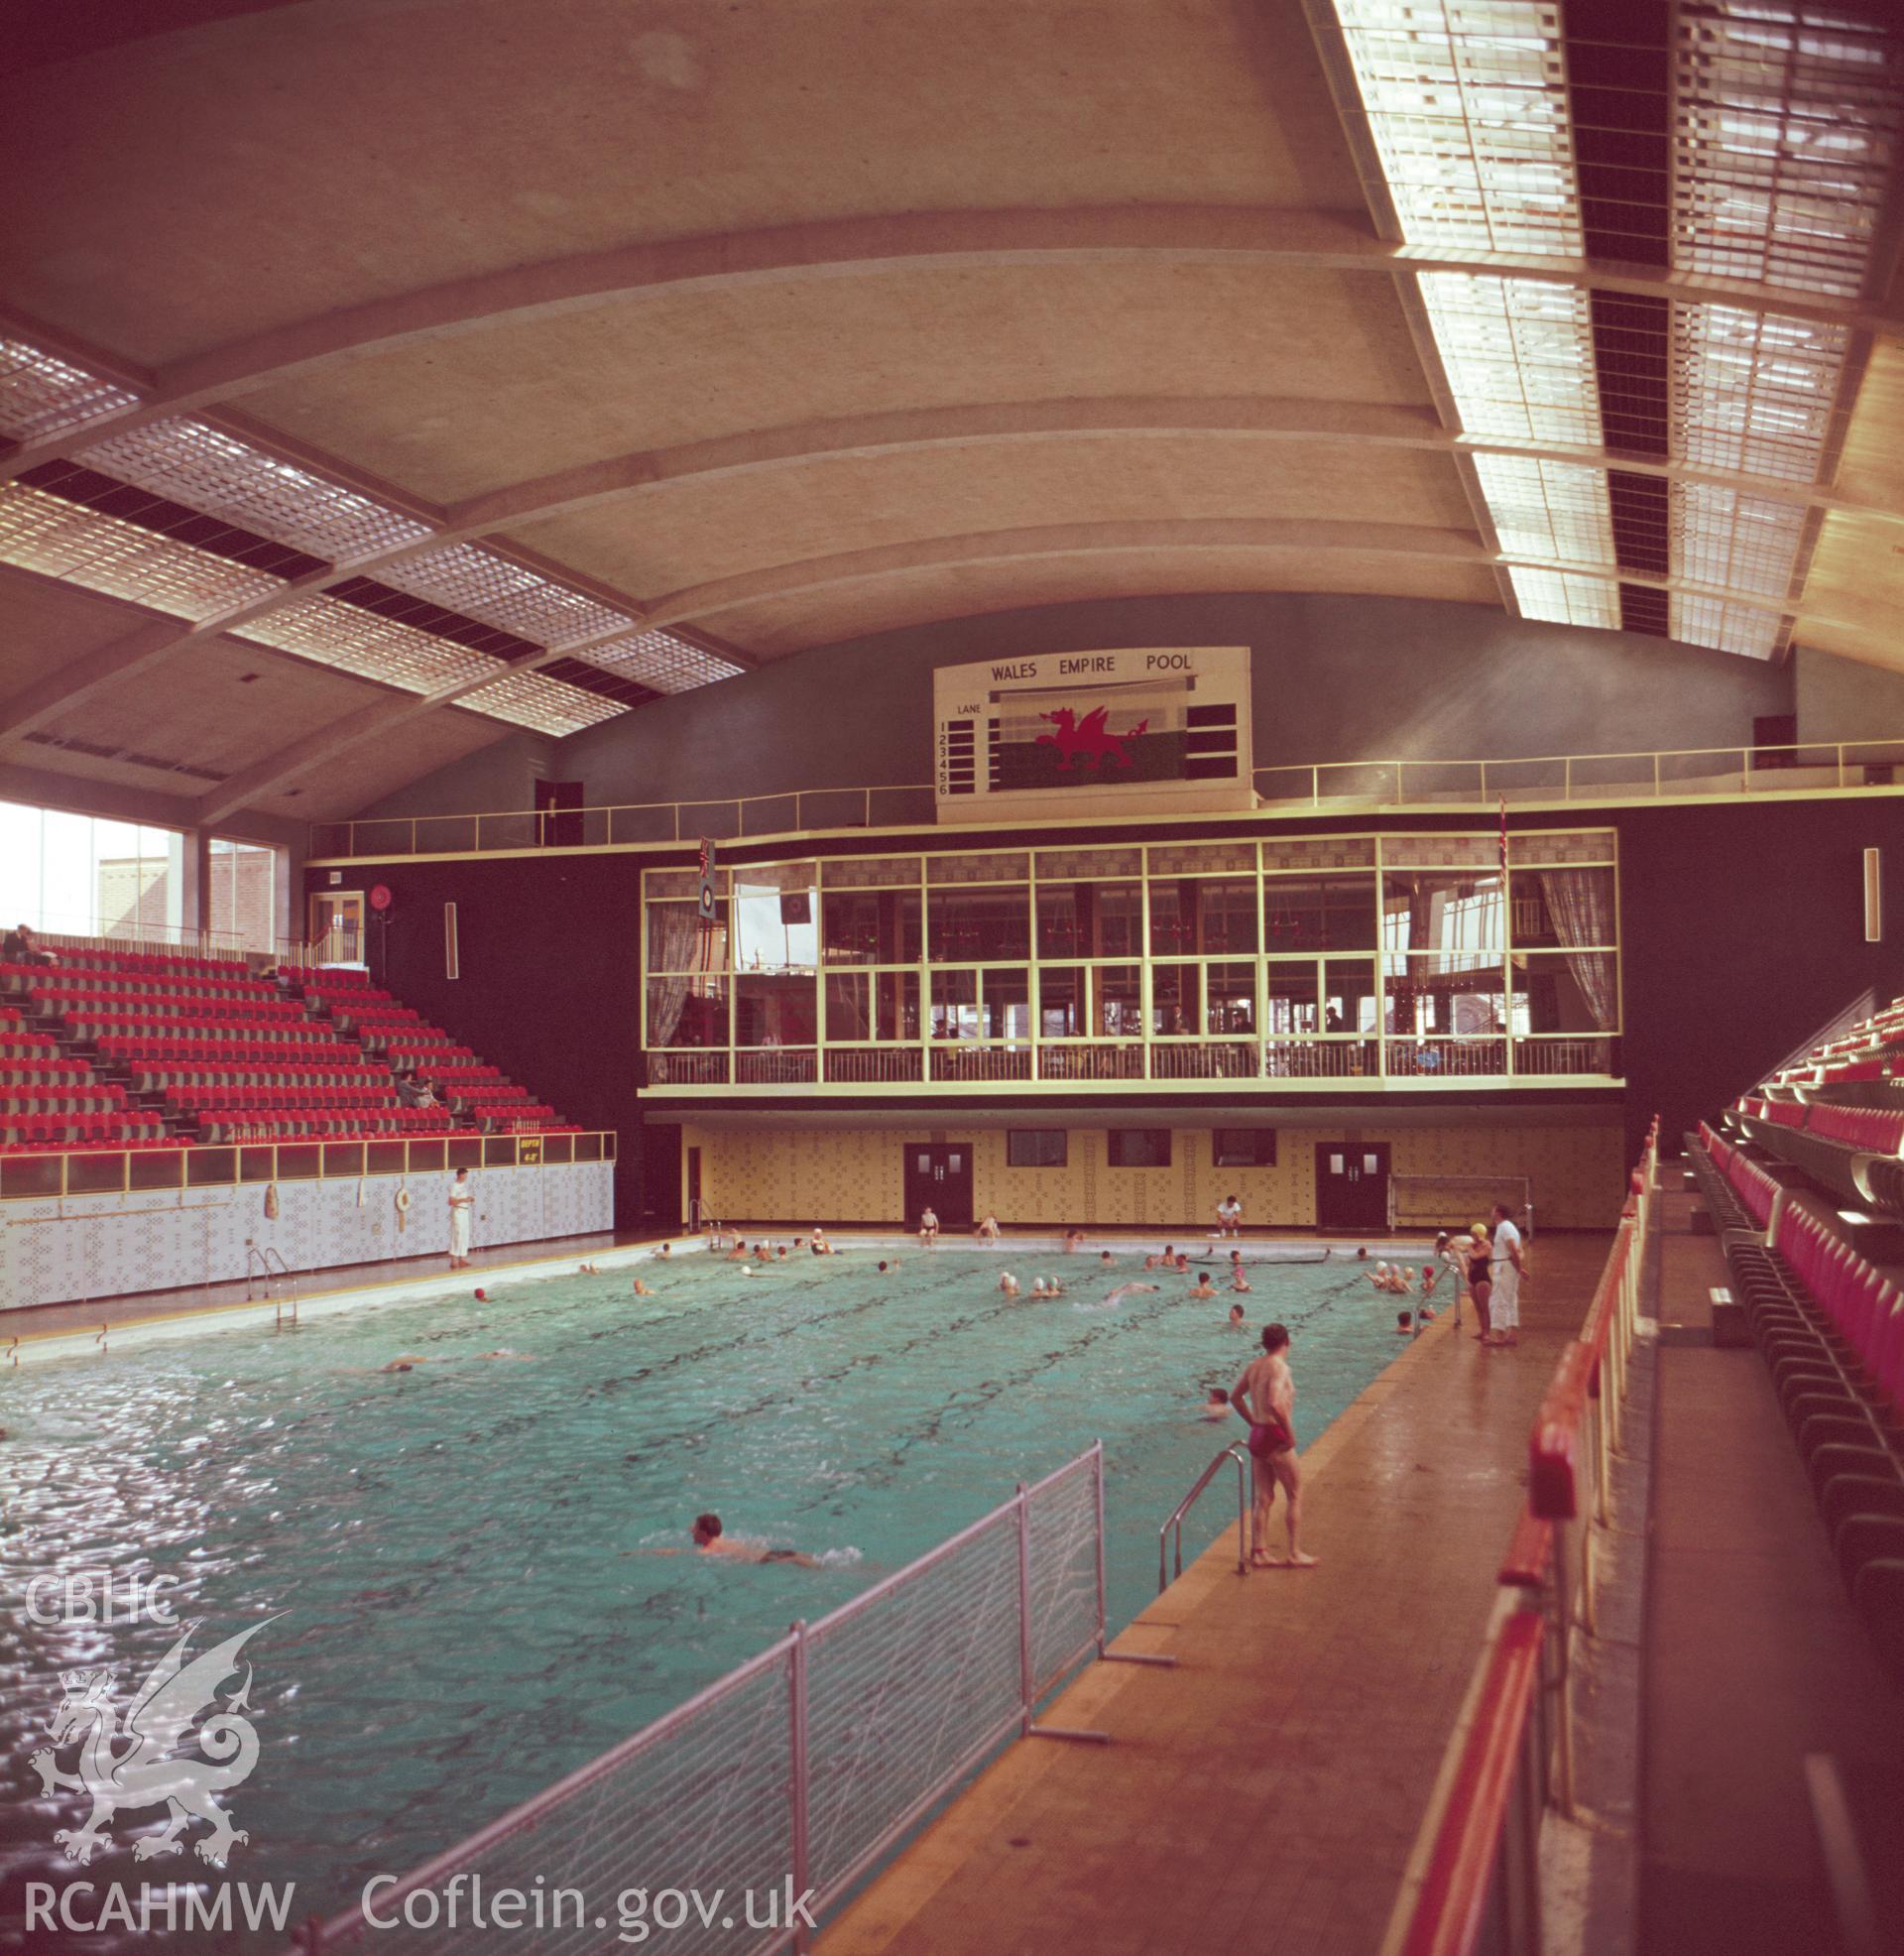 1 colour transparency showing interior view of the Empire Swimming Pool, Cardiff; collated by the former Central Office of Information.